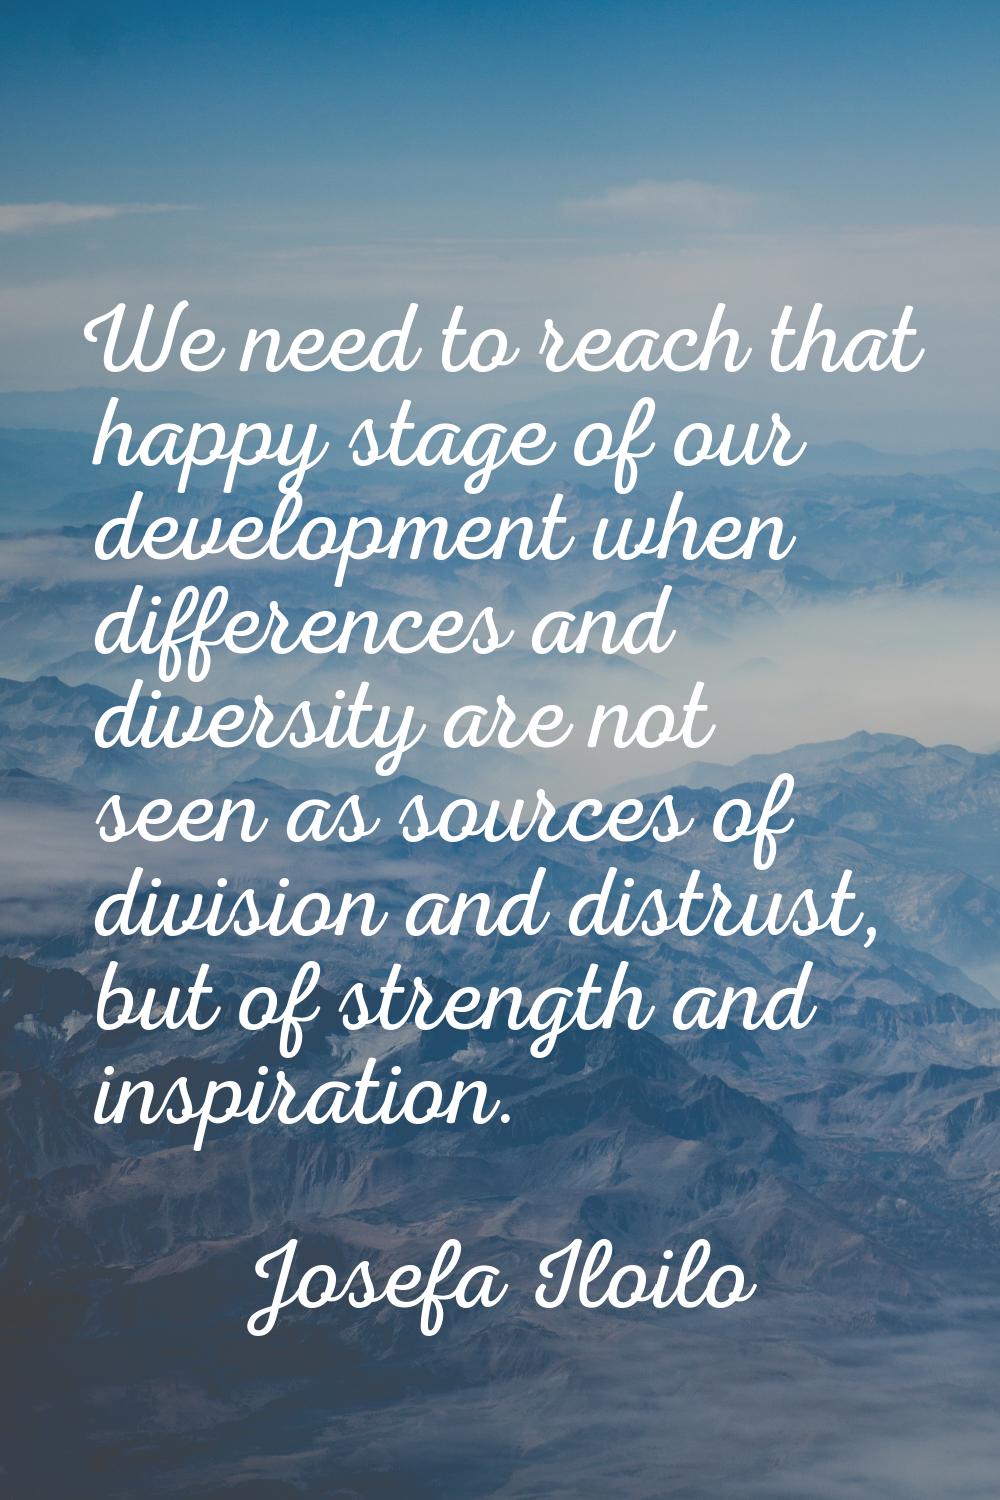 We need to reach that happy stage of our development when differences and diversity are not seen as